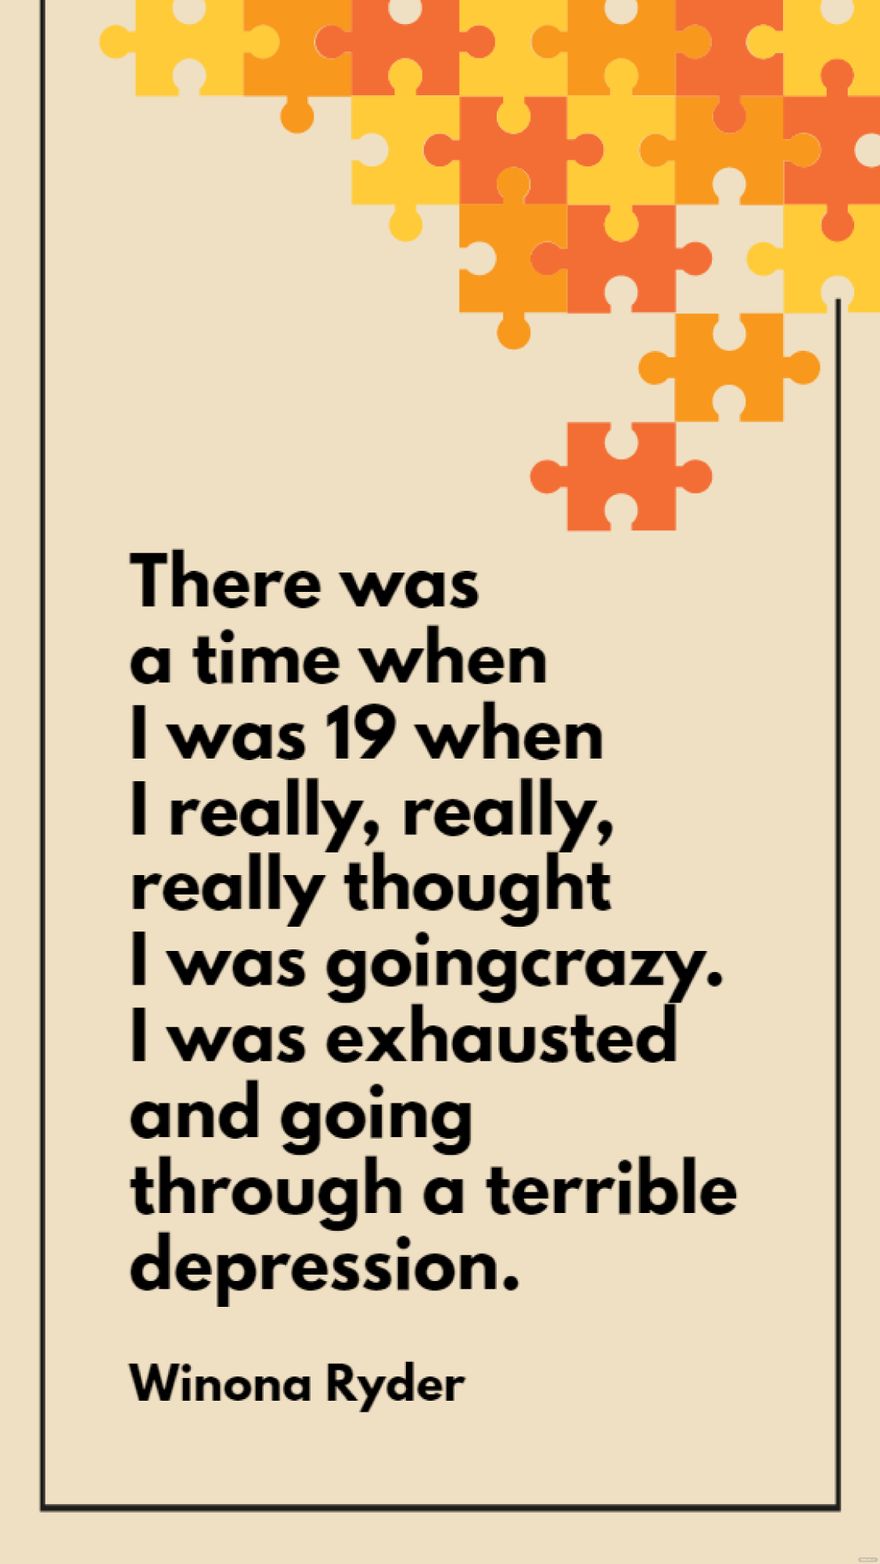 Winona Ryder - There was a time when I was 19 when I really, really, really thought I was going crazy. I was exhausted and going through a terrible depression.